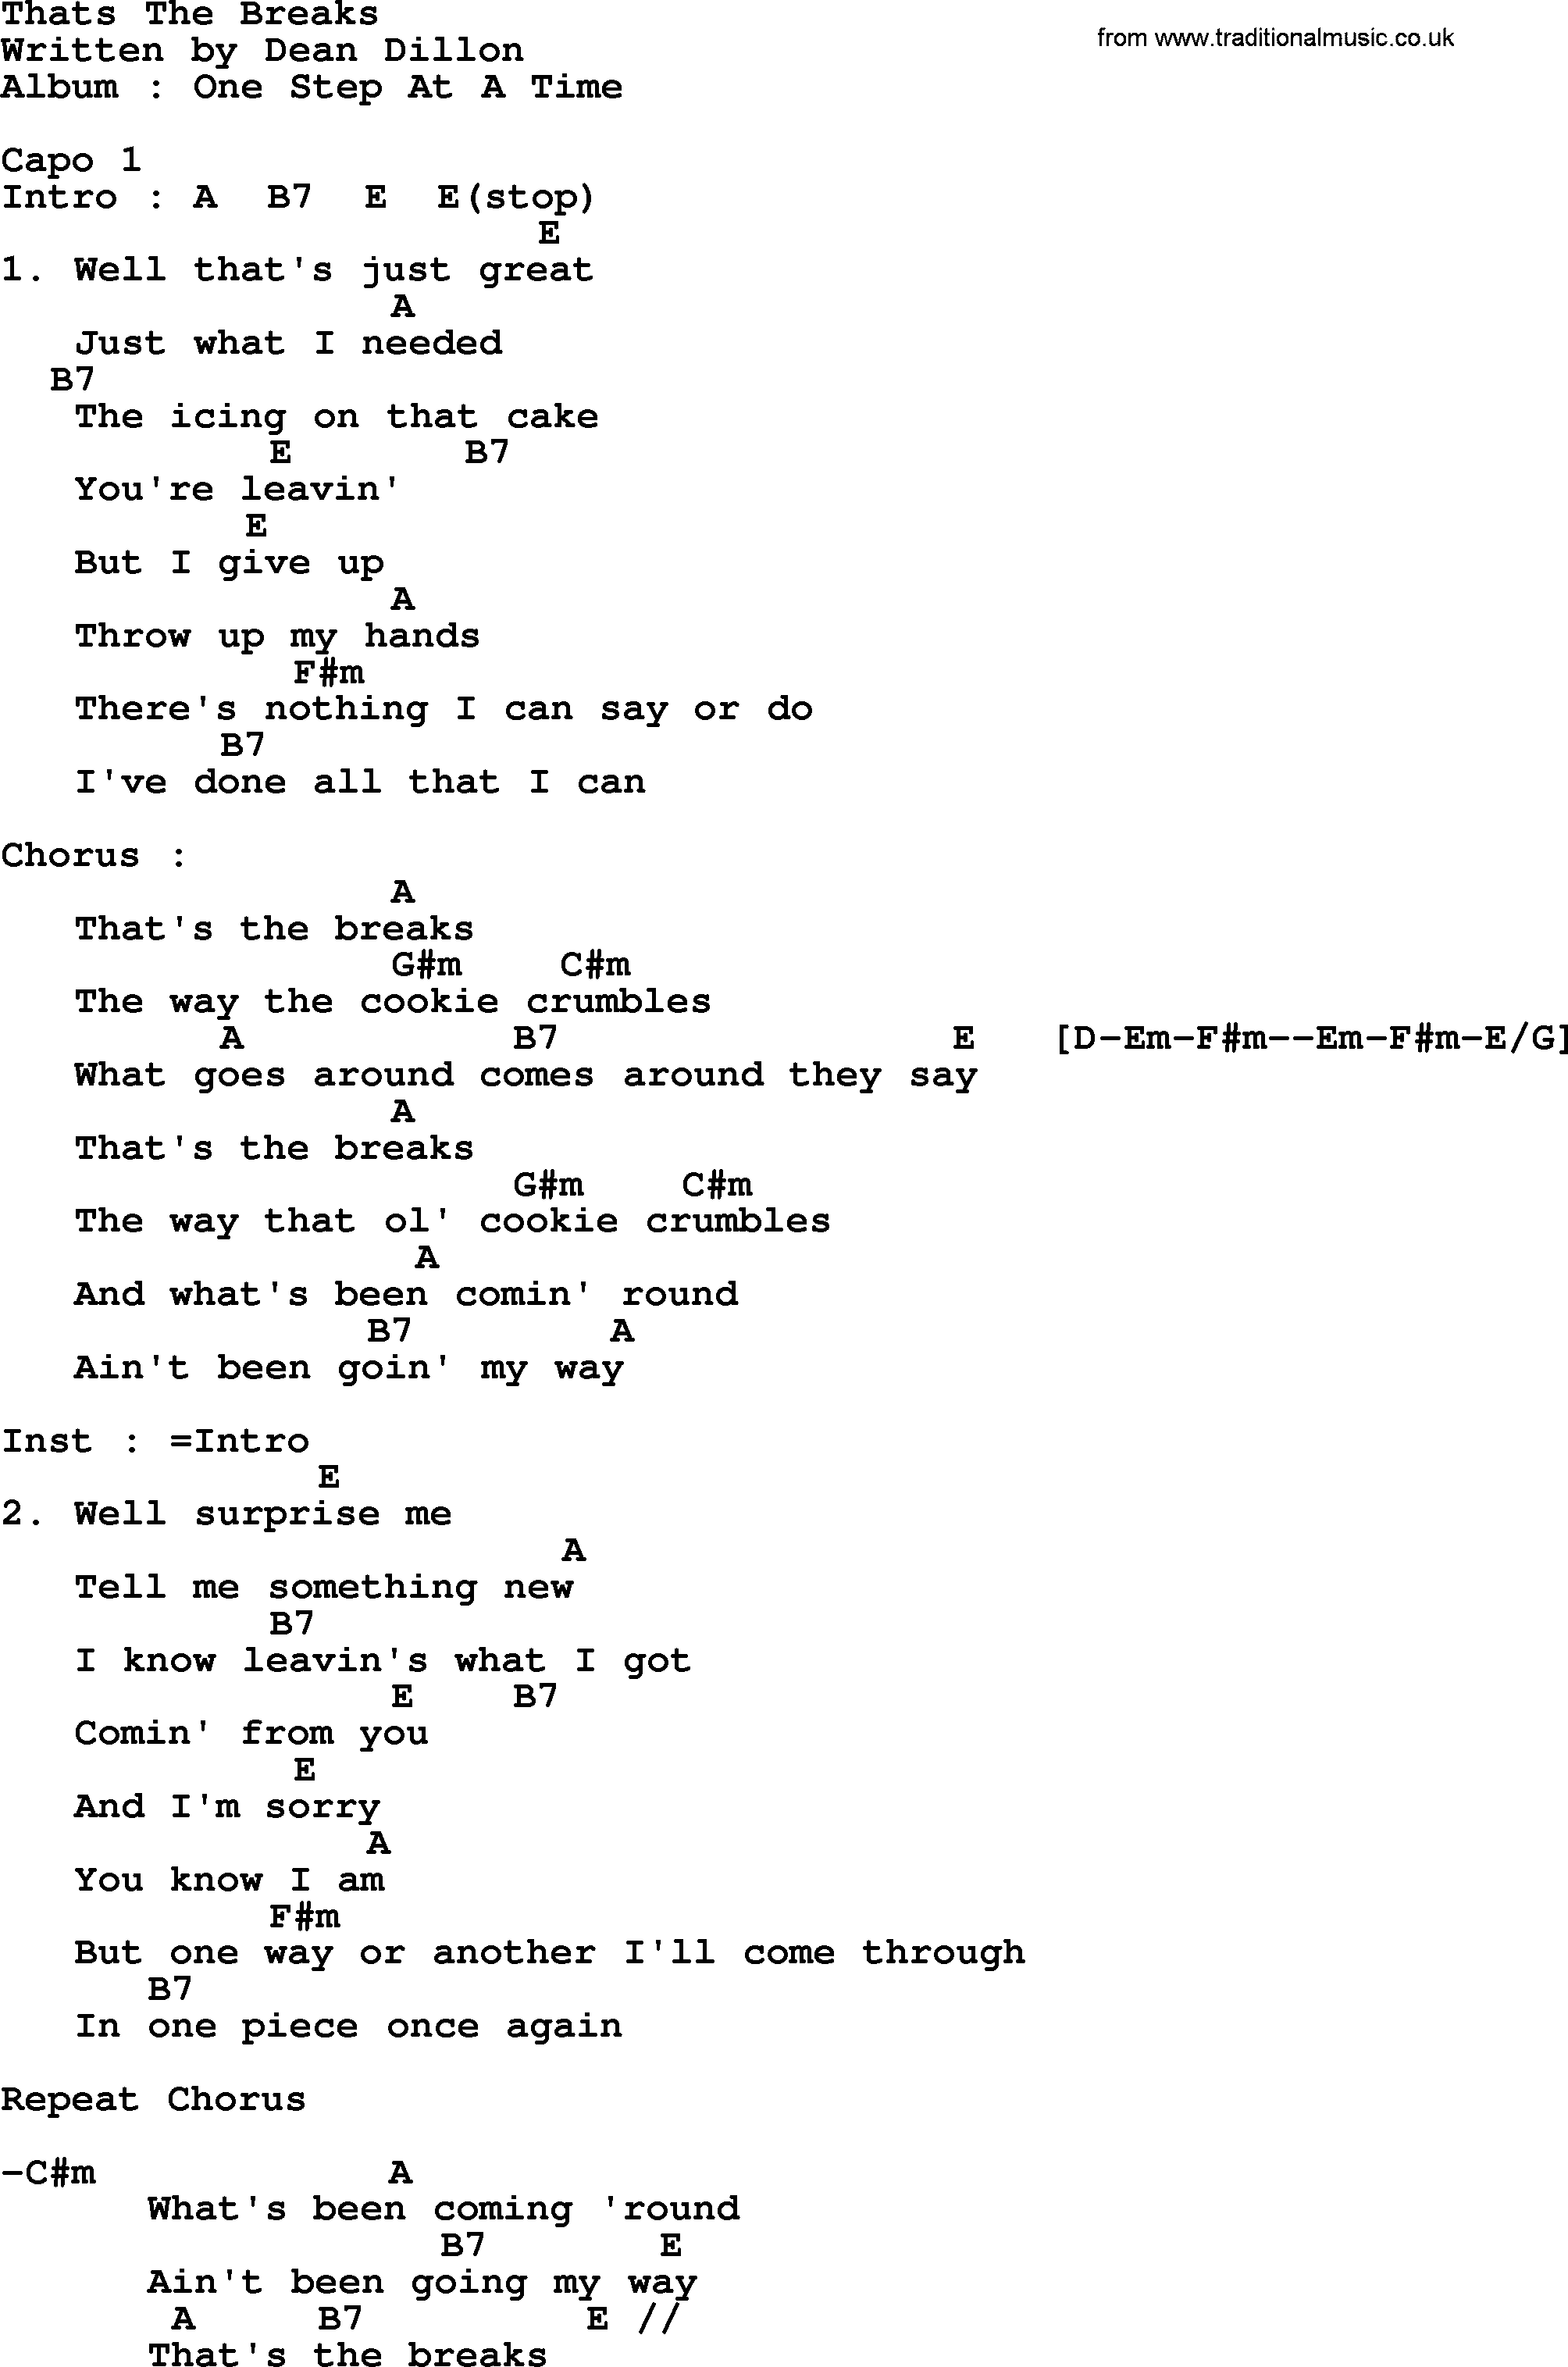 George Strait song: Thats The Breaks, lyrics and chords